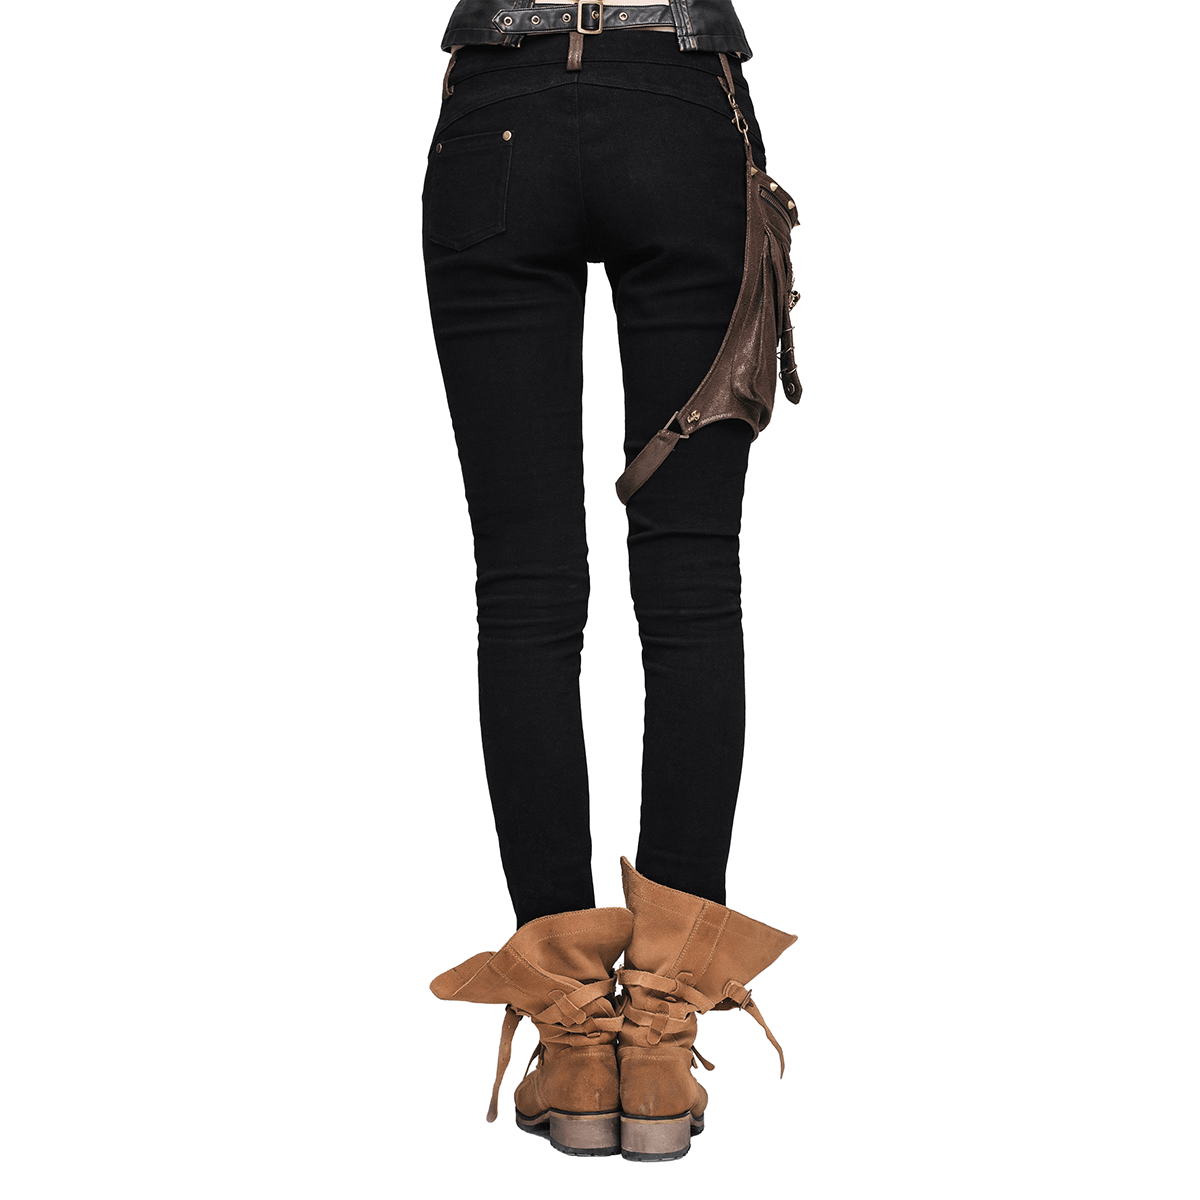 Steampunk Pants With Leather Pocket for Women / Motorcycle Stretchy Pencil Trousers - HARD'N'HEAVY